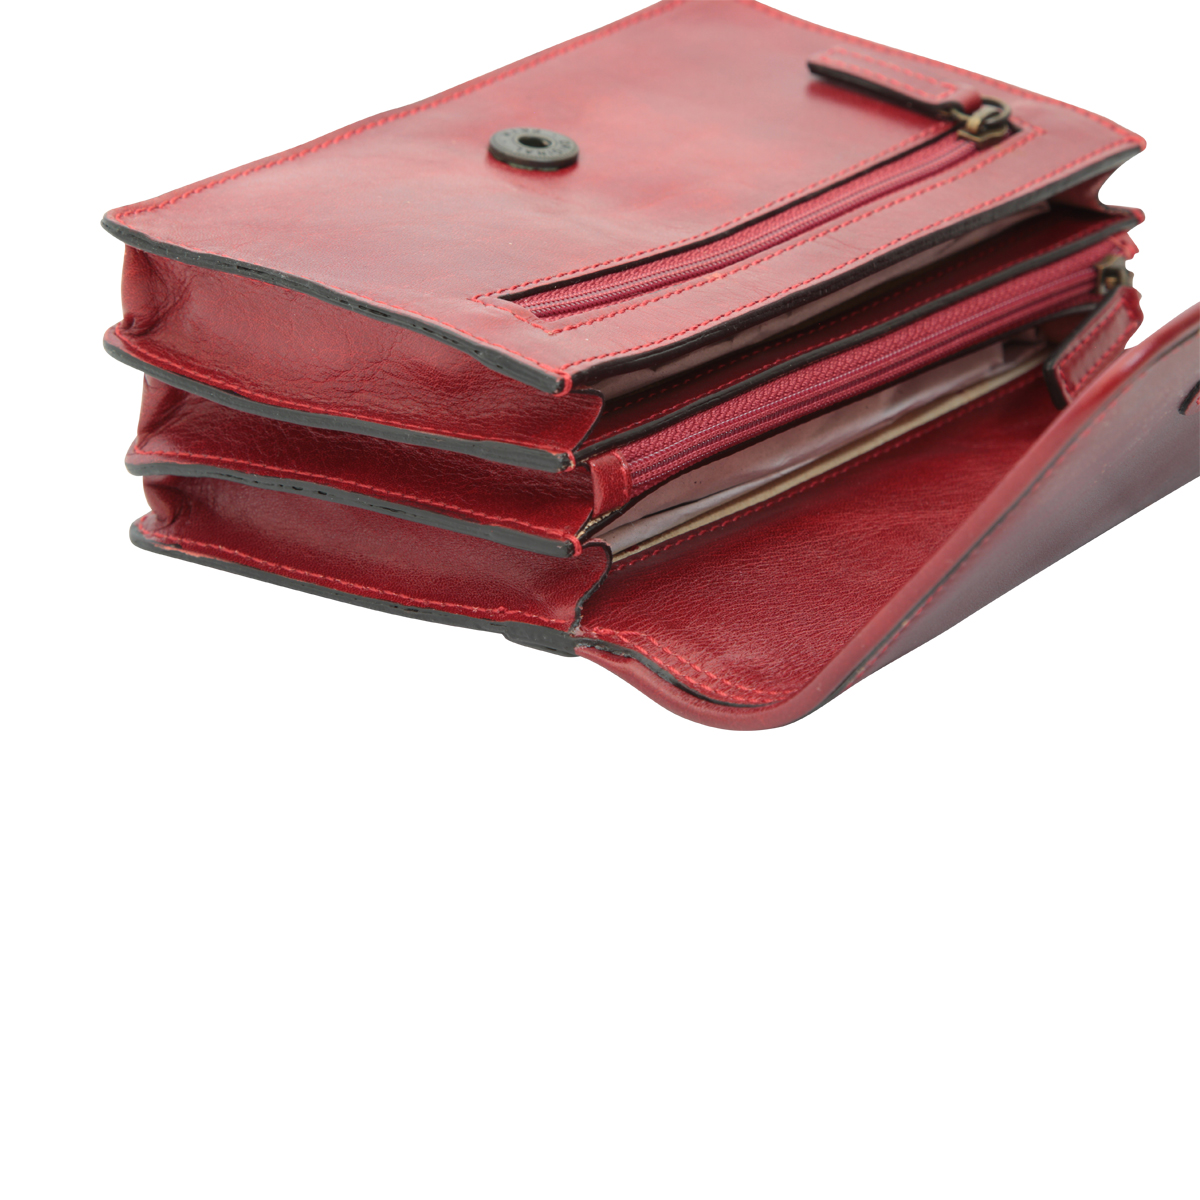 Leather pochette - red | 407989RO | EURO | Old Angler Firenze